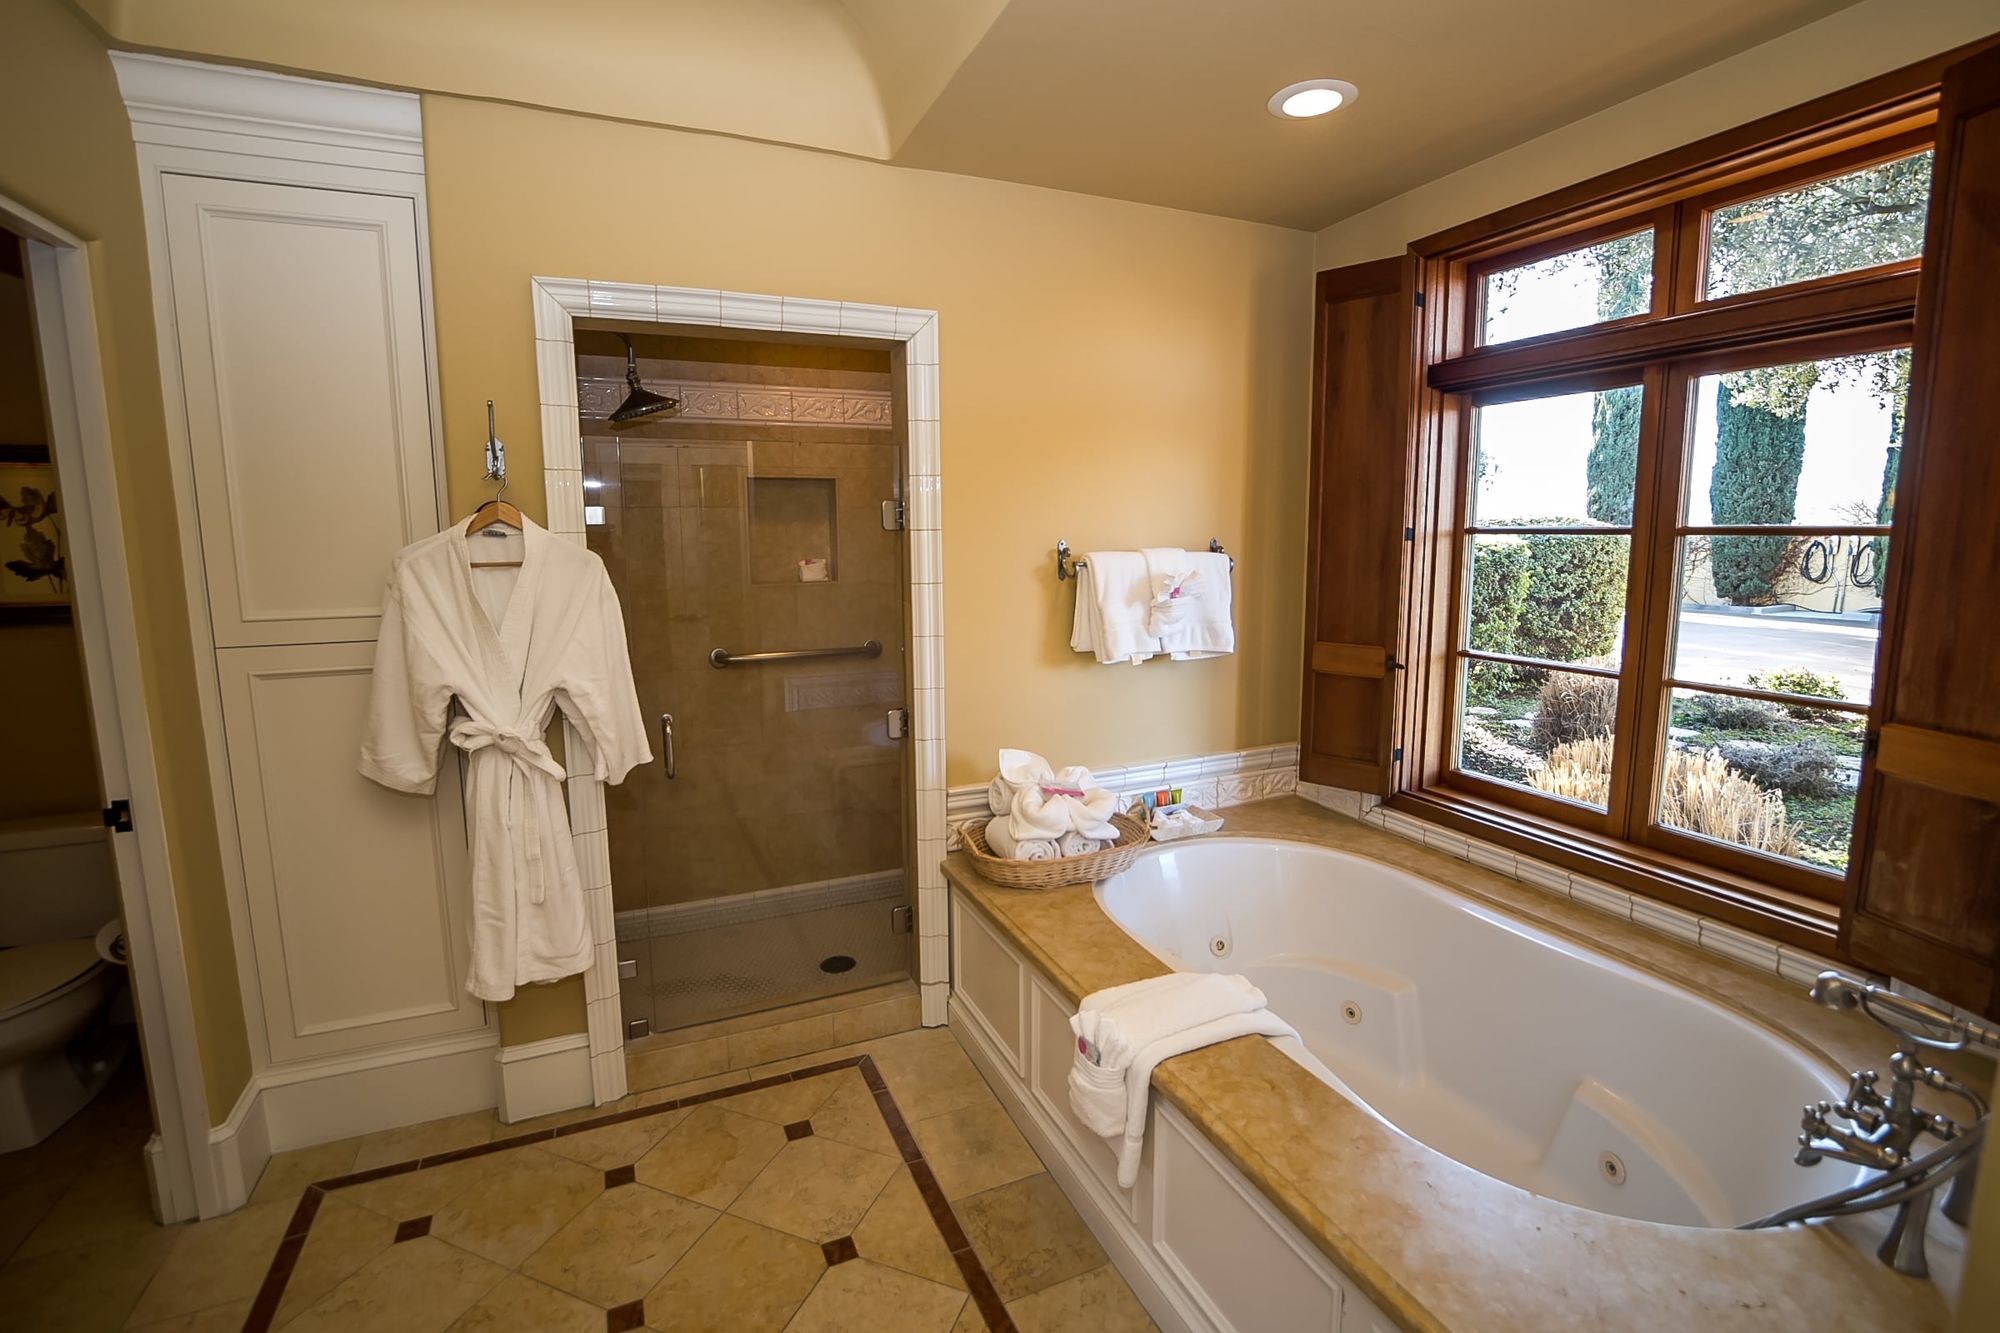 Spa bathtub with walk in shower to the side and a robe hanging on a hook